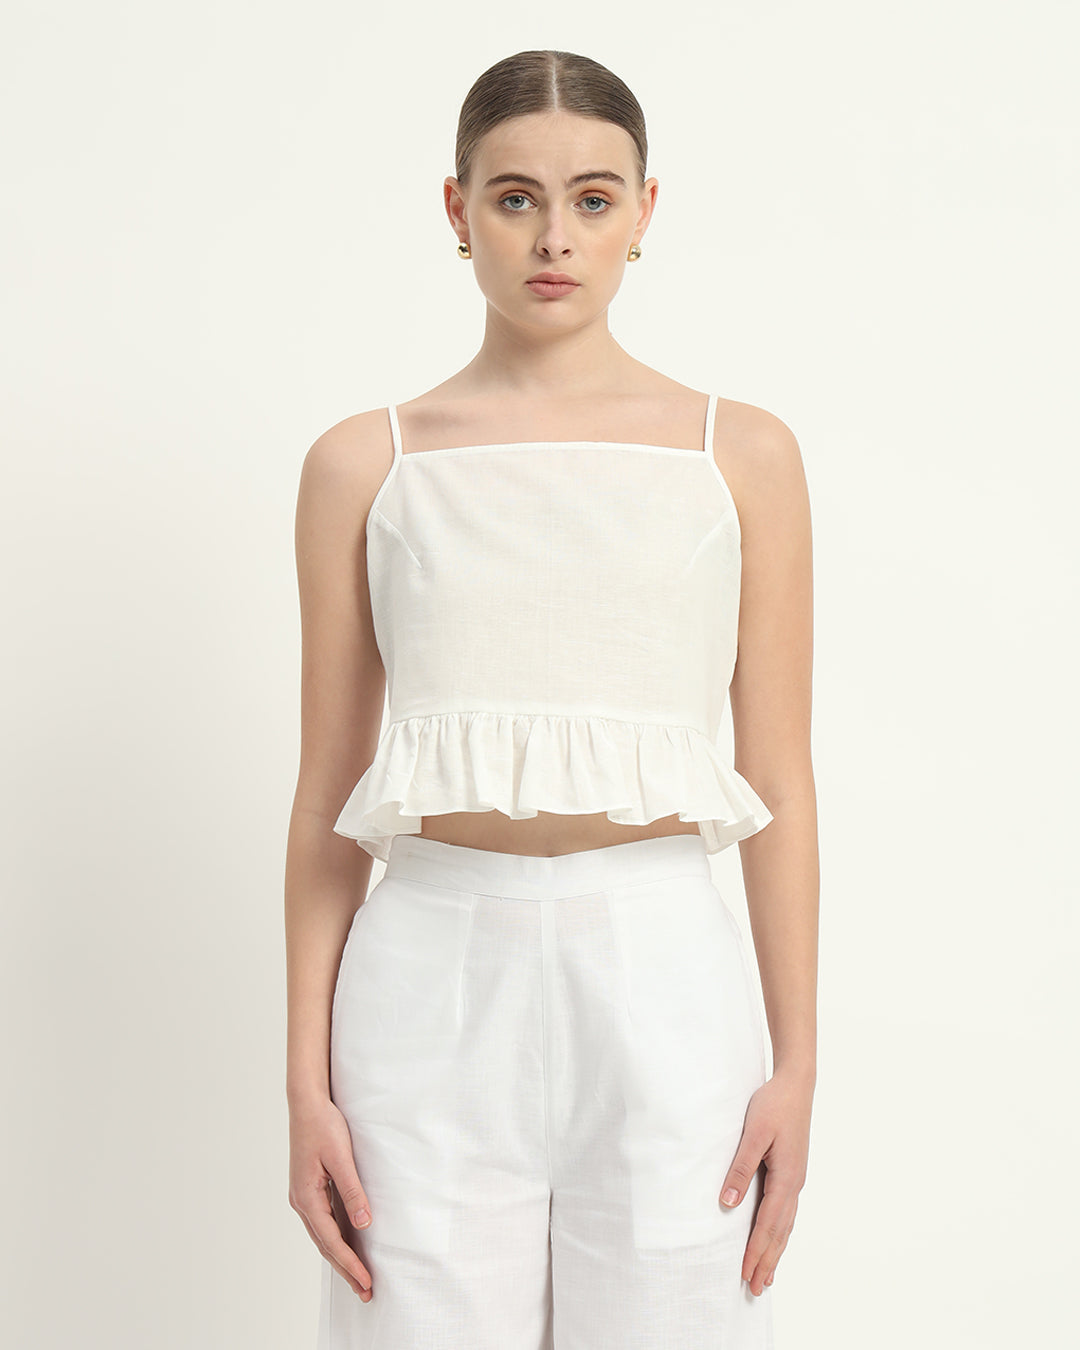 Whimsical Willow White Linen Top (Without Bottoms)